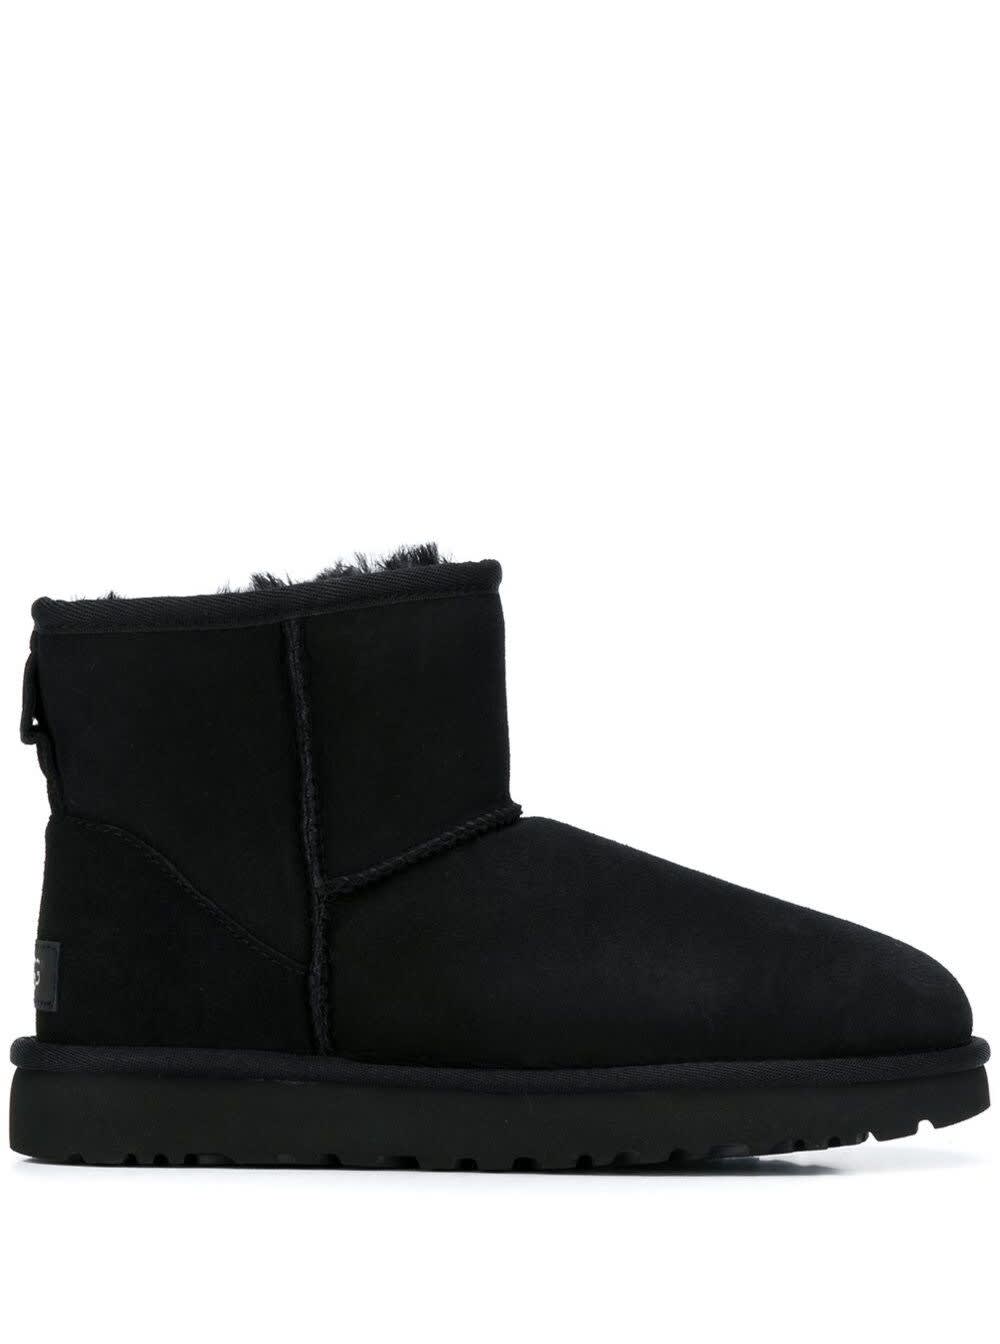 Buy UGG Mini Classic Boots online, shop UGG shoes with free shipping